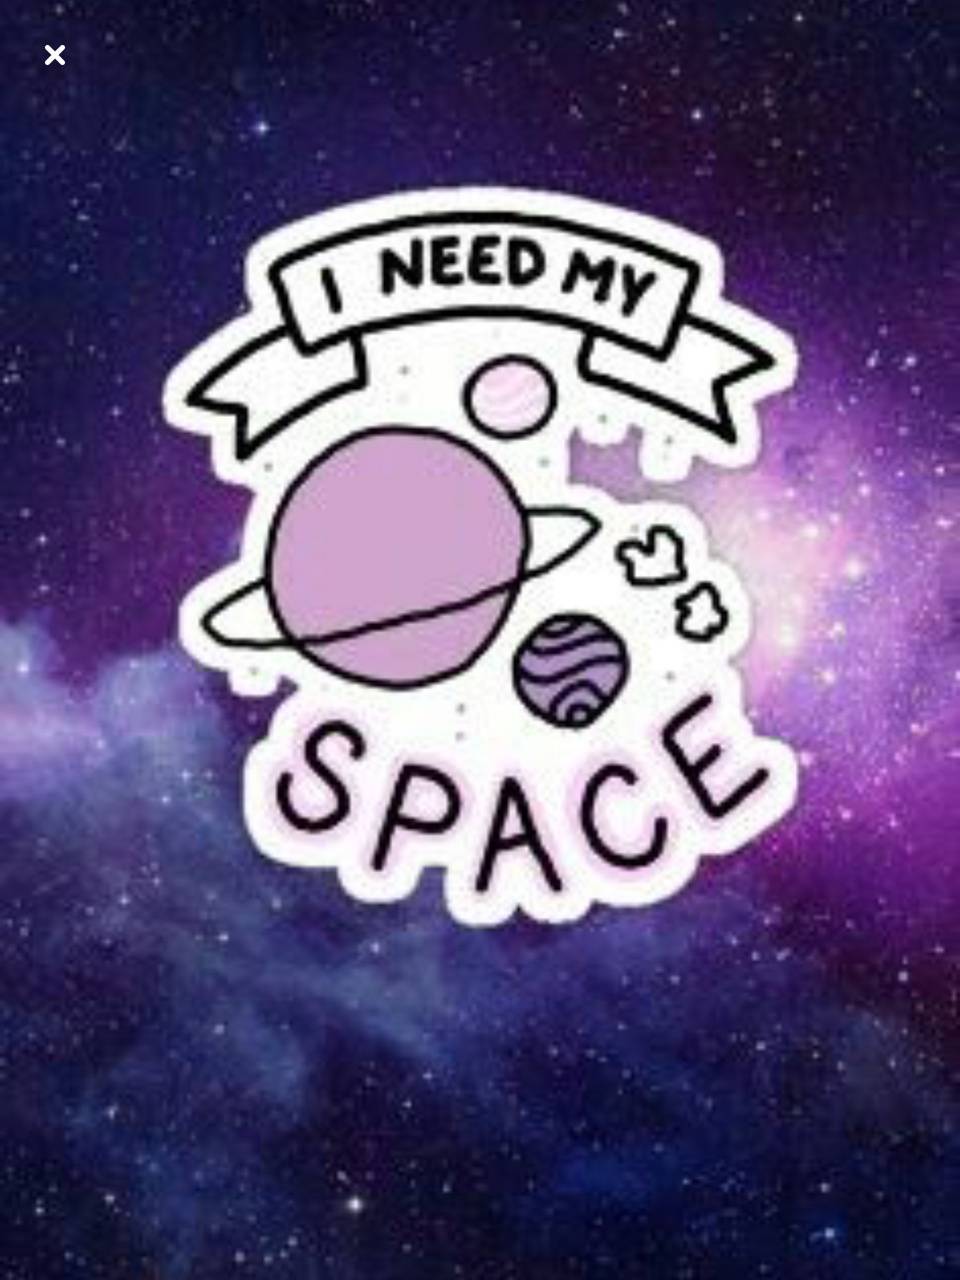 I Need My Space Wallpapers - Top Free I Need My Space Backgrounds